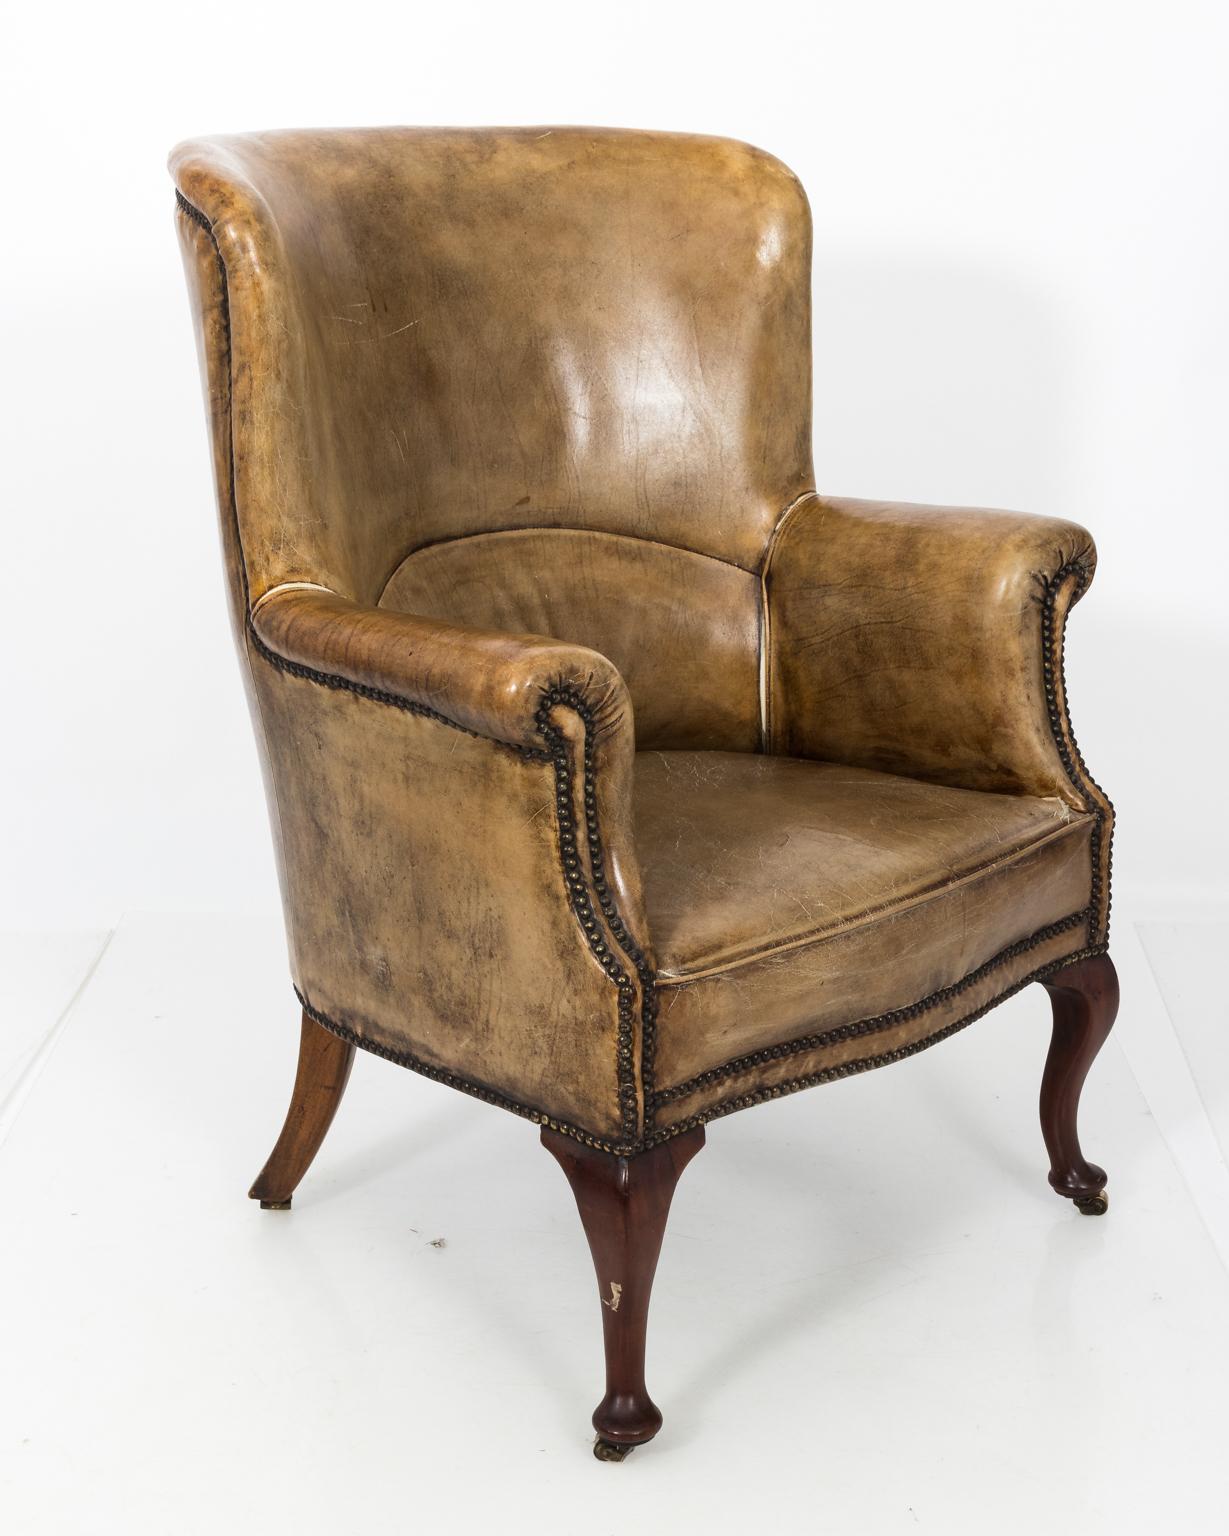 French Provincial Early 19th Century French Leather Wing Chair